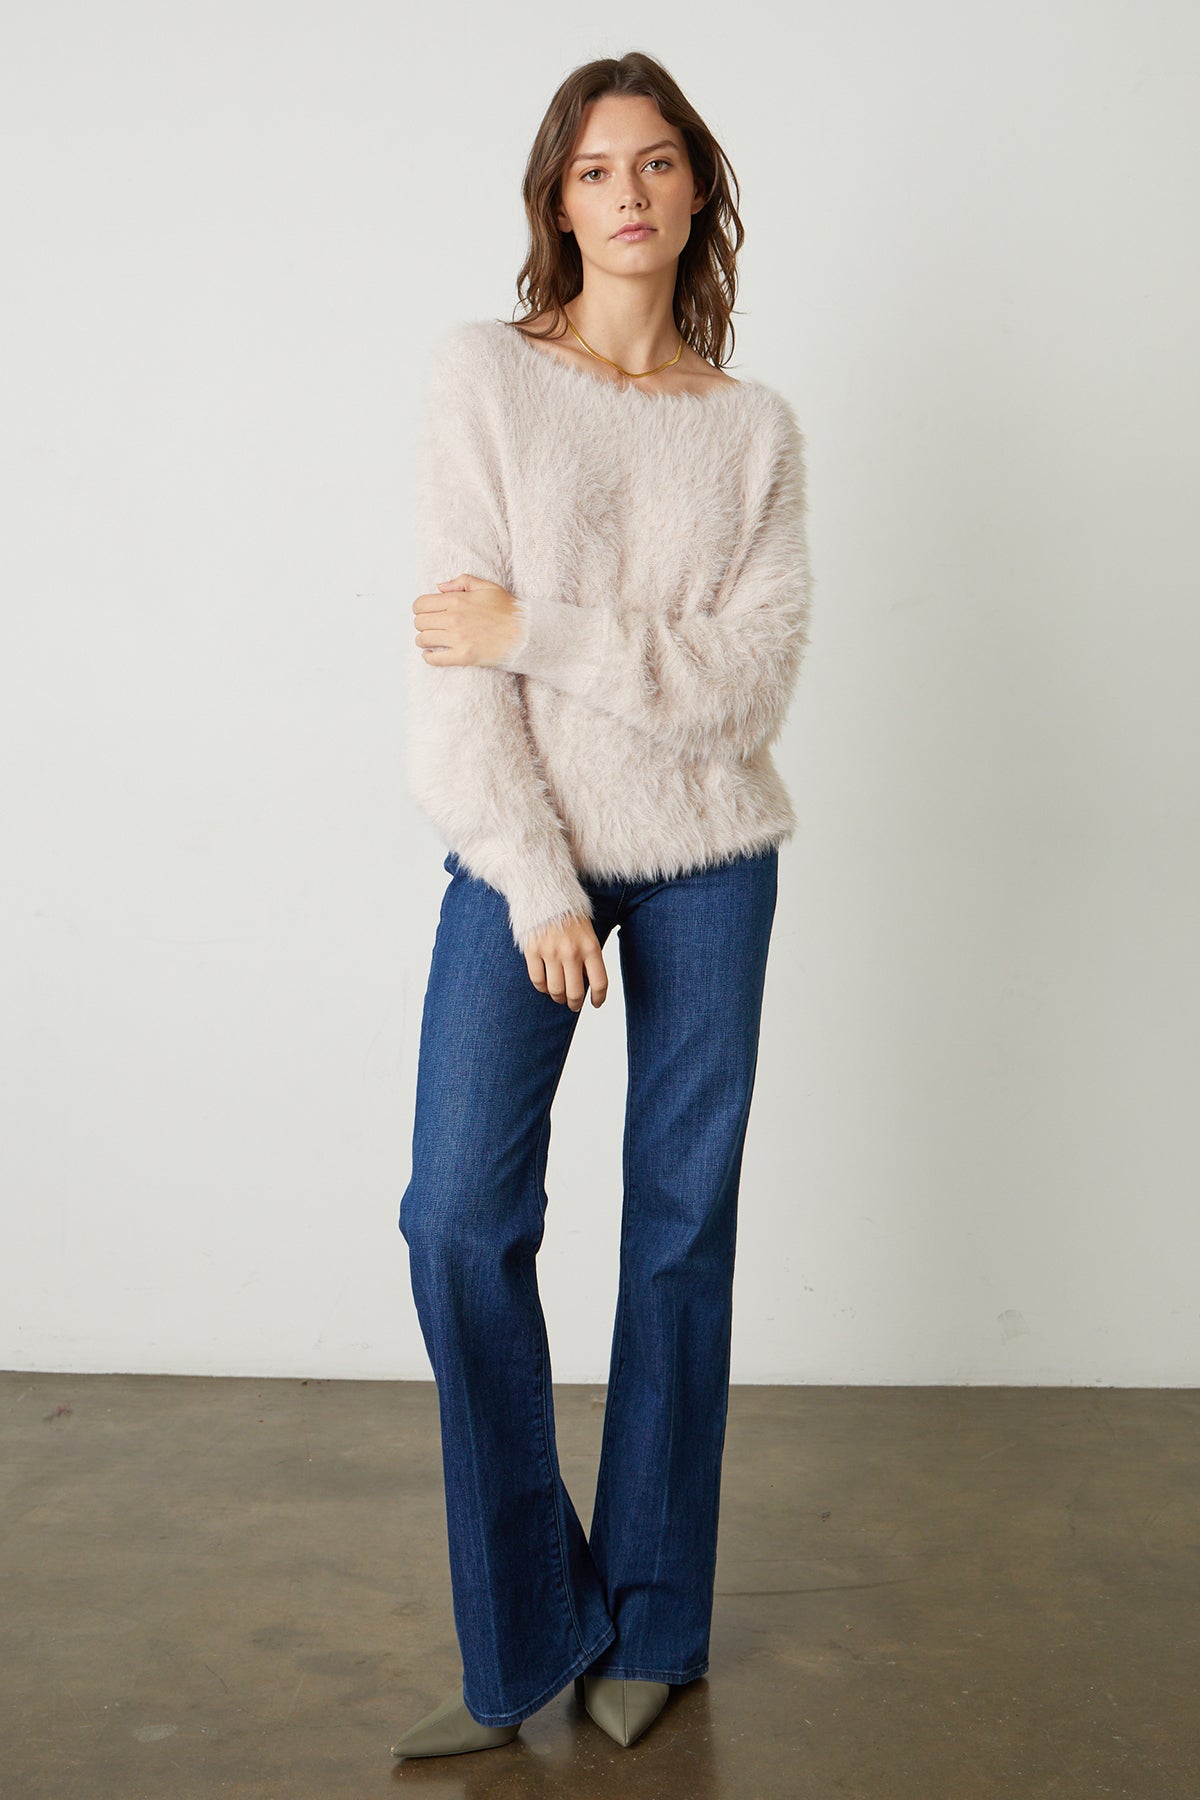 Betty Feather Yarn Boat Neck Sweater in pale blush pink with blue denim and heels full length front-25548650774721